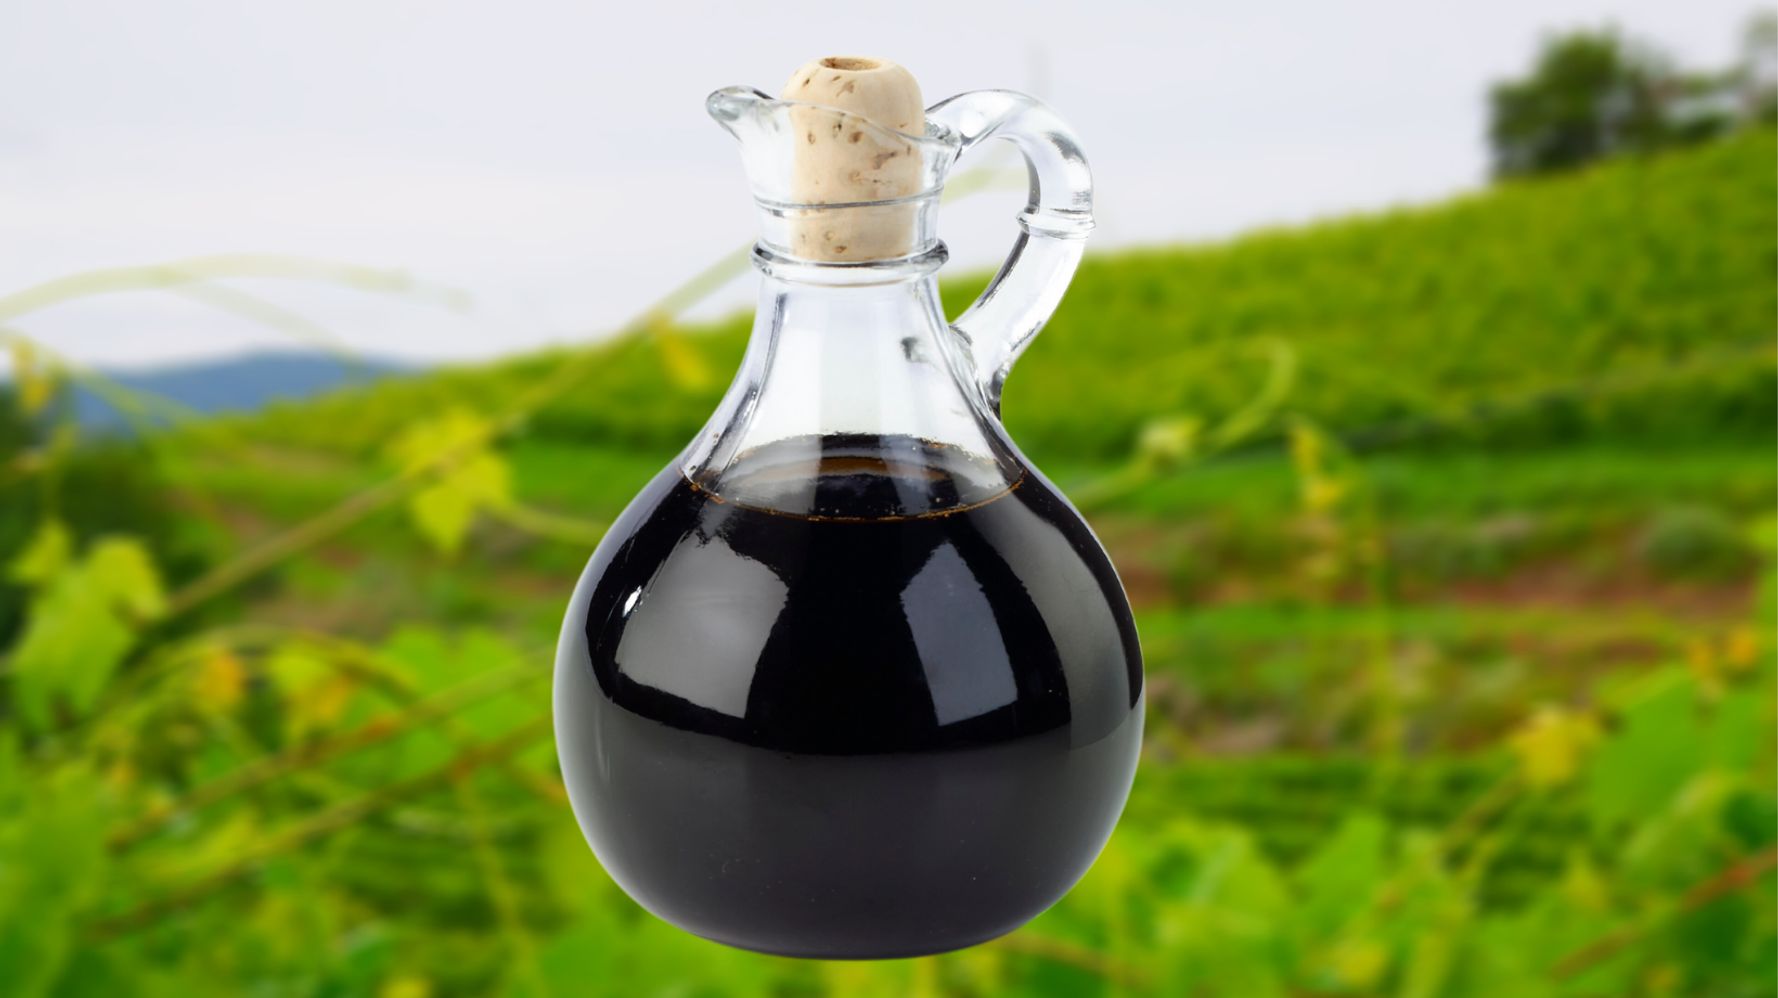 If You're Buying Balsamic Vinegar, Here's How To Tell If It's Really From Modena